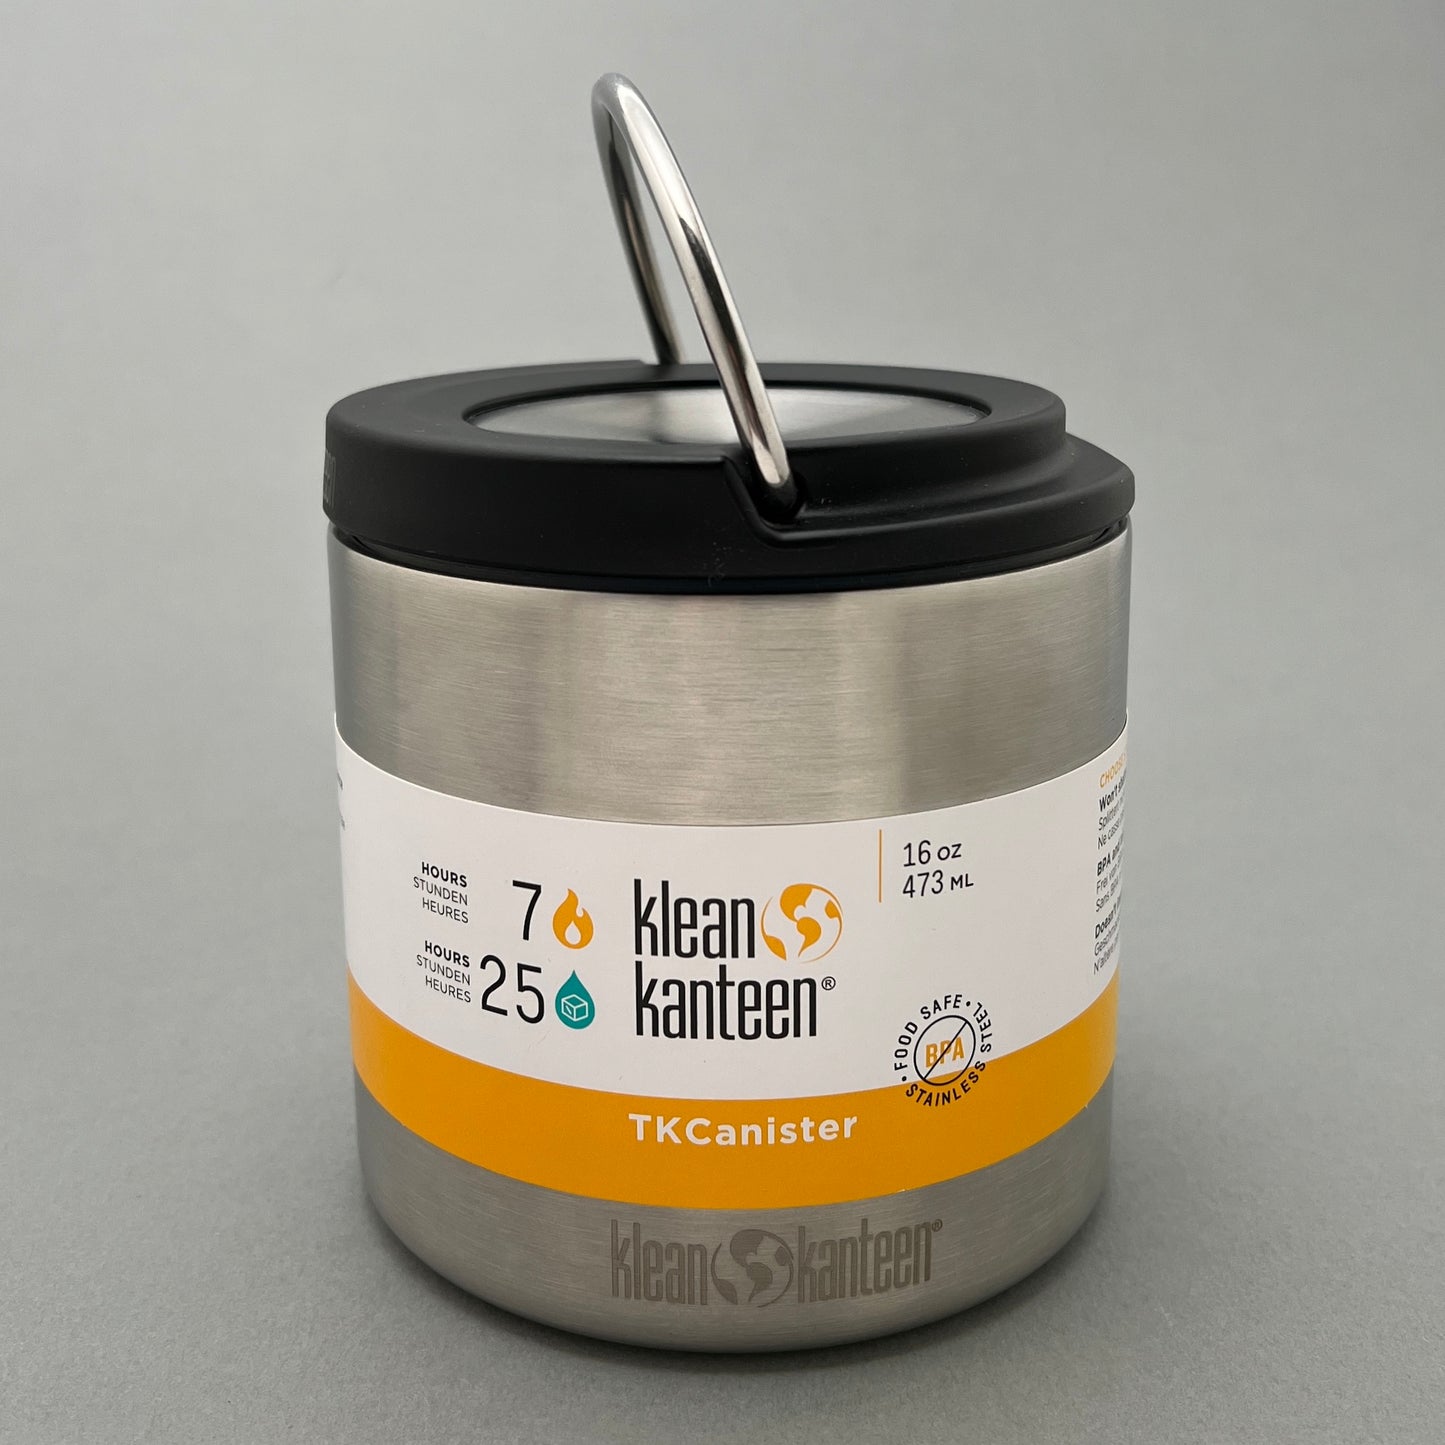 A 473ml stainless steel food canister with a insulated screw on top from klean kanteen standing in a gray background